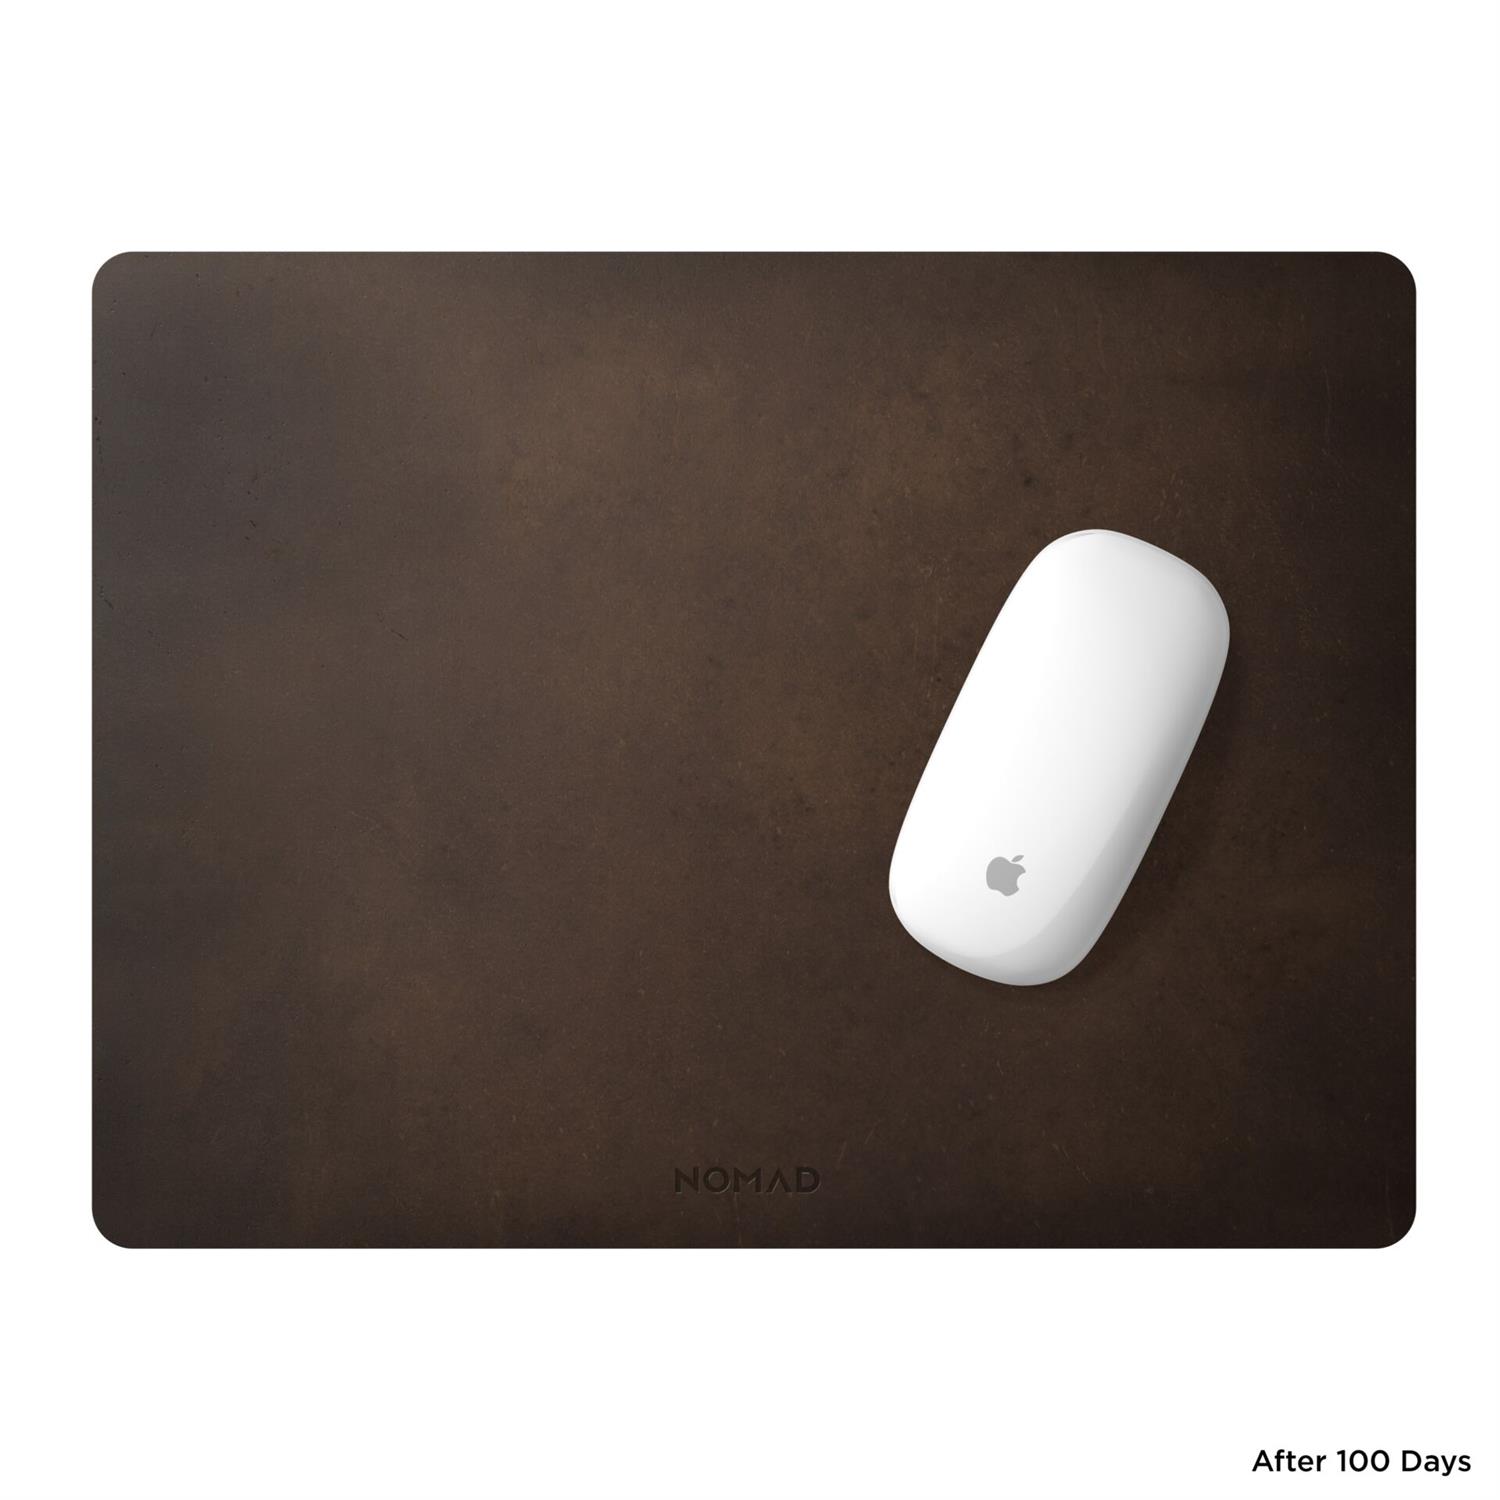 Nomad Mousepad Leather 16-Inch - Rustic Brown